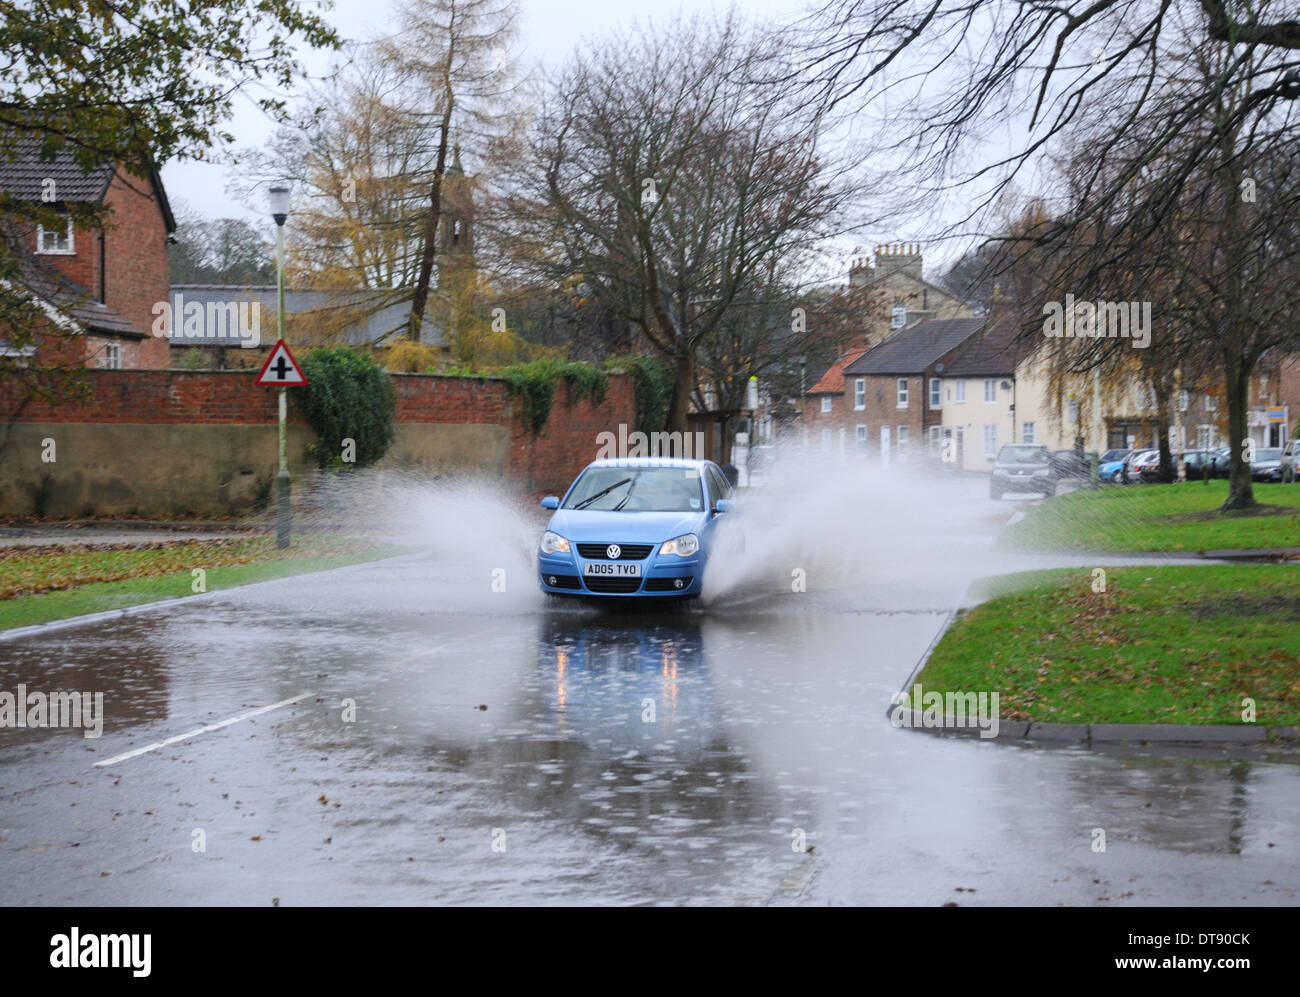 Local flooding on road after heavy rainfall Stock Photo